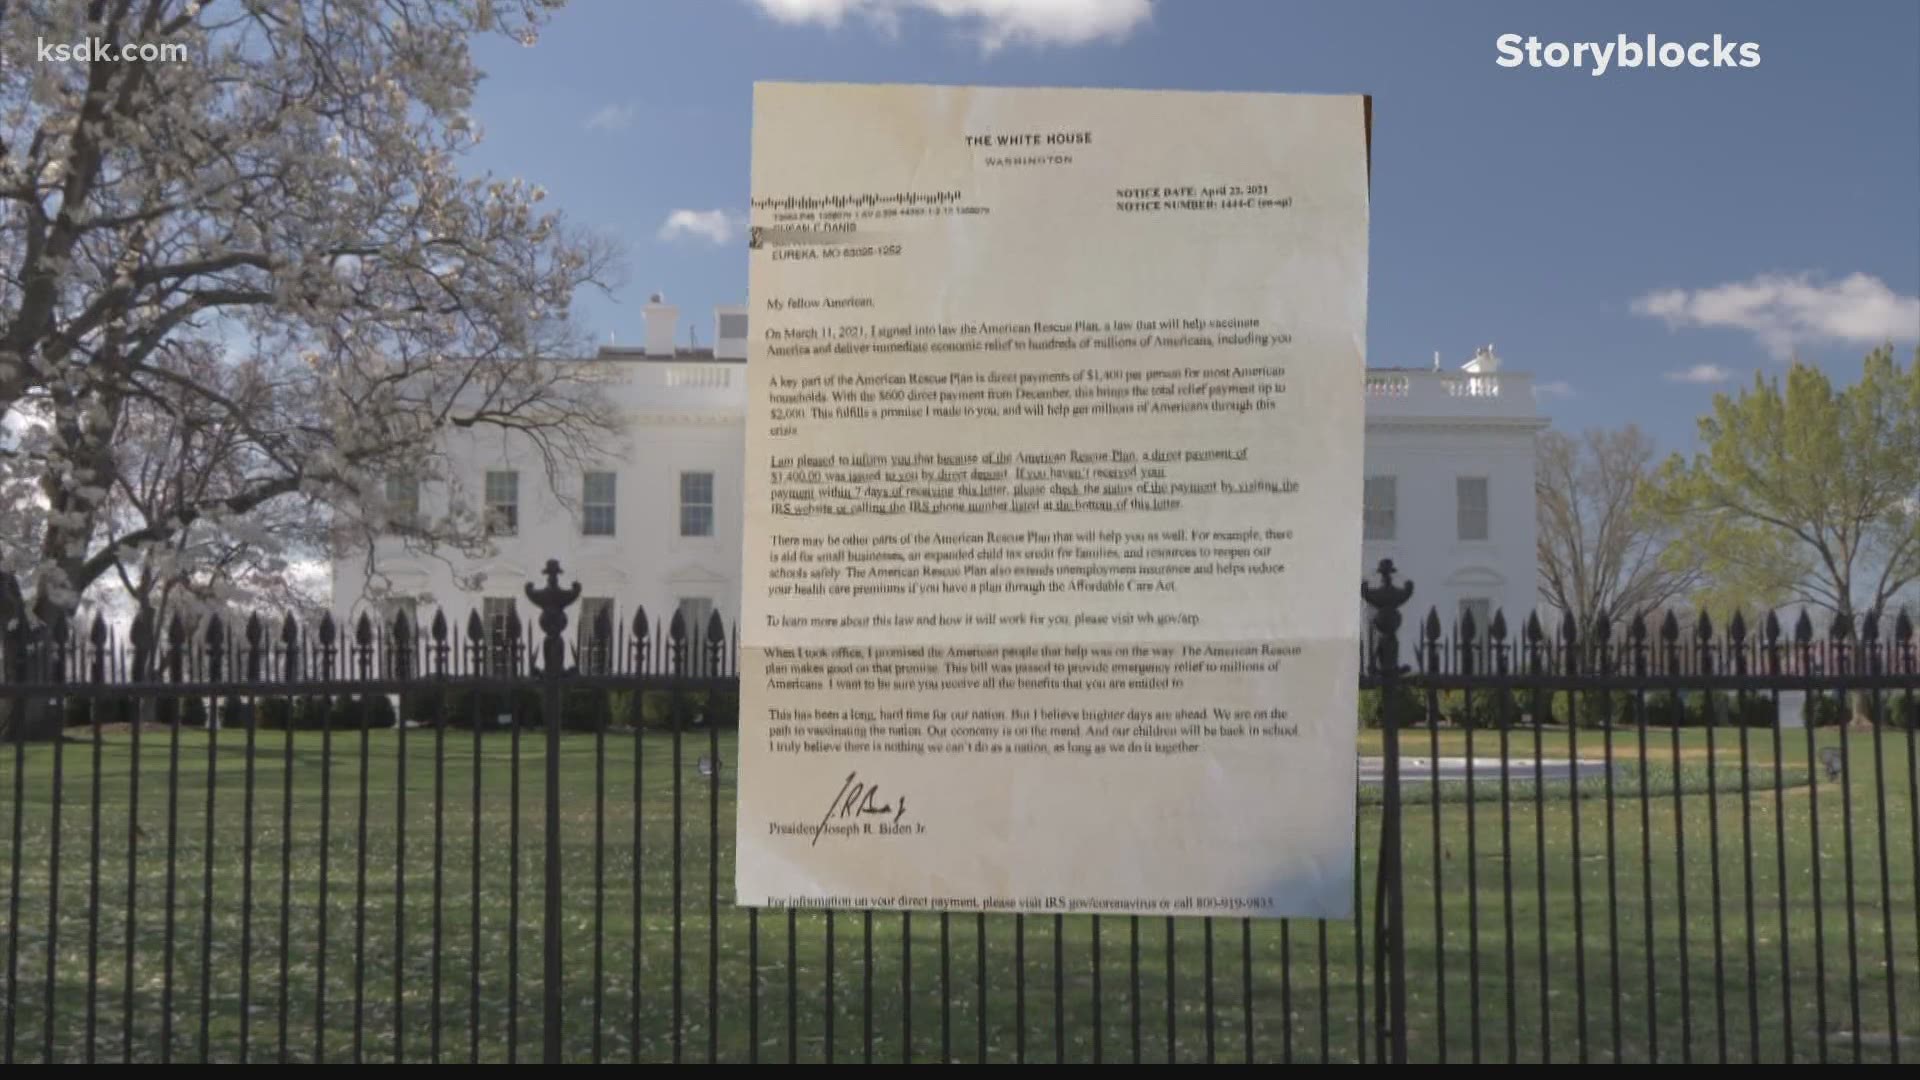 Letters are landing in local mailboxes claiming to be from the White House. A 5 On Your Side viewer asked the VERIFY team to find out if they are legit